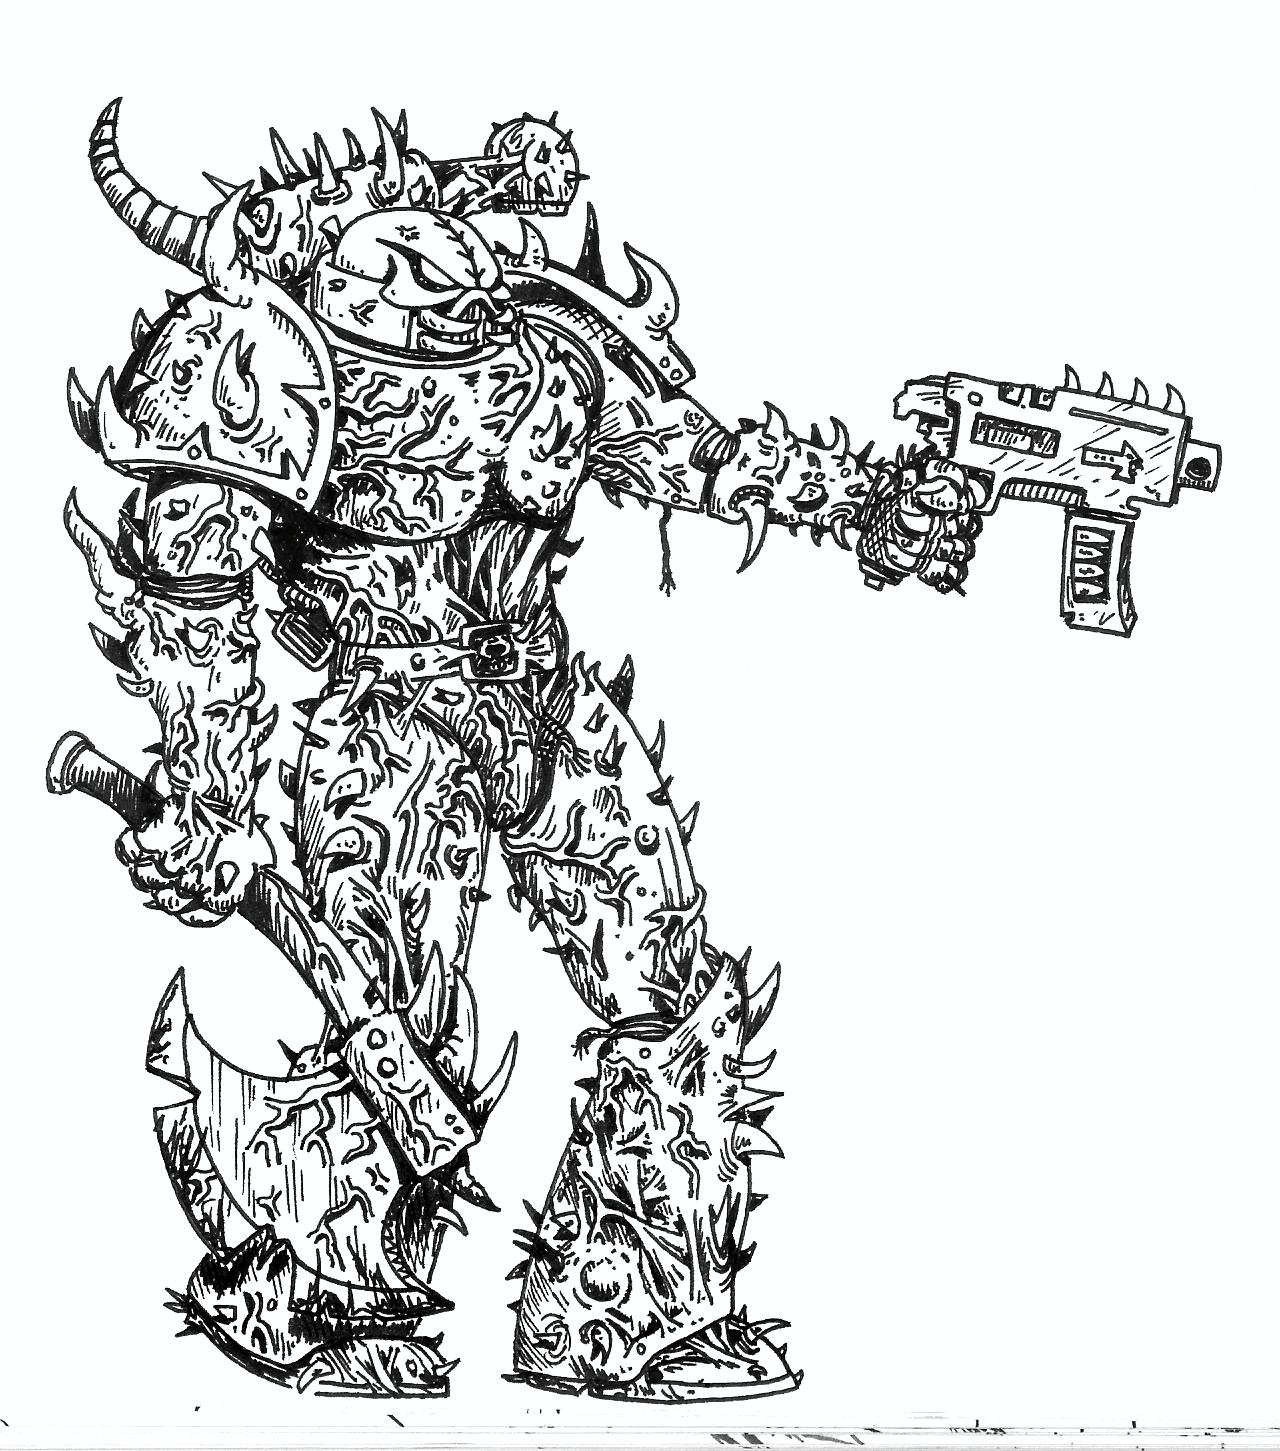 80´s, Artwork, Chaos, Chaos Space Marines, Conversion, Daemons, Drawing, Drawings, First Edition, Old, Old Style, School, Space Marines, Style